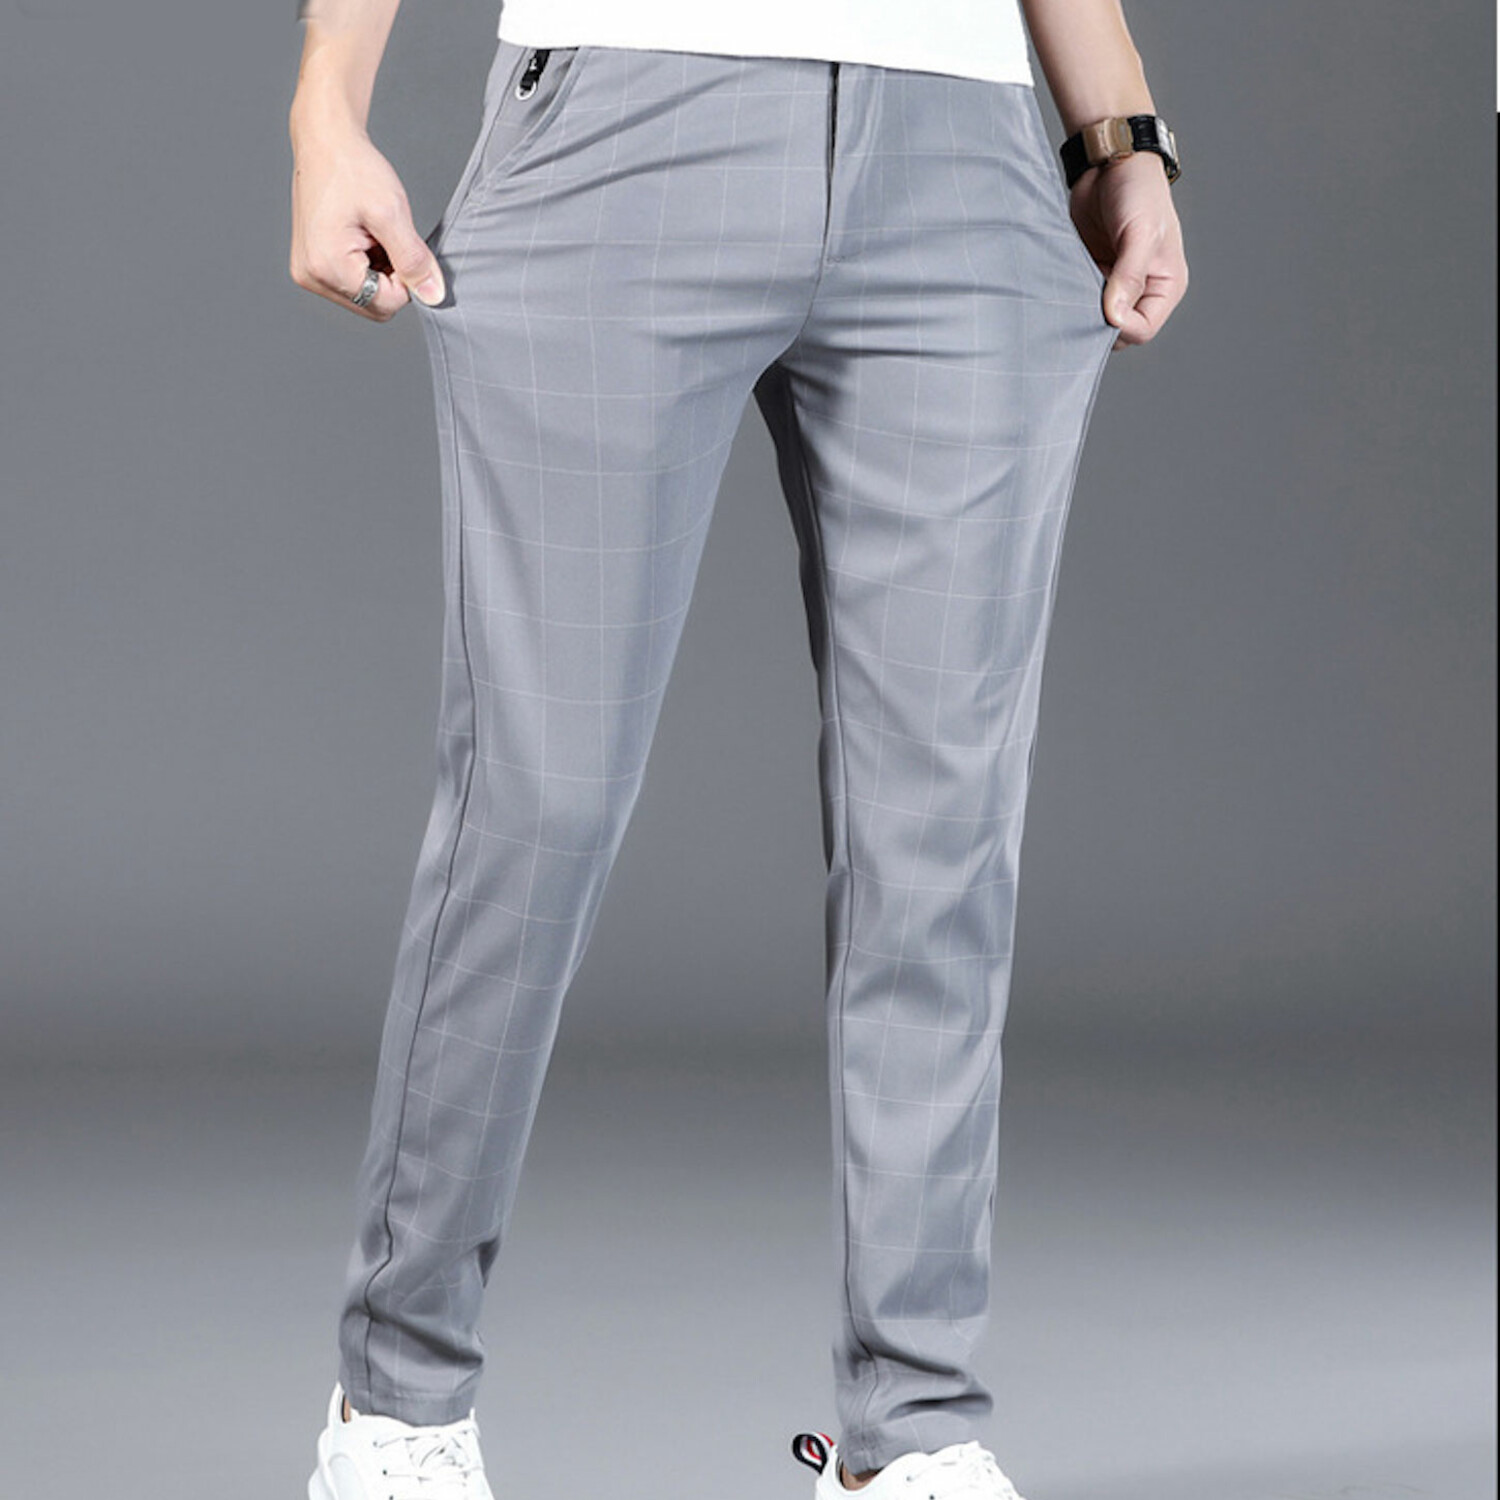 Wide Grid Print Slim Fit Pants // Light Gray (28) - Amedeo Exclusive Slim Fit Pants - Touch of ...